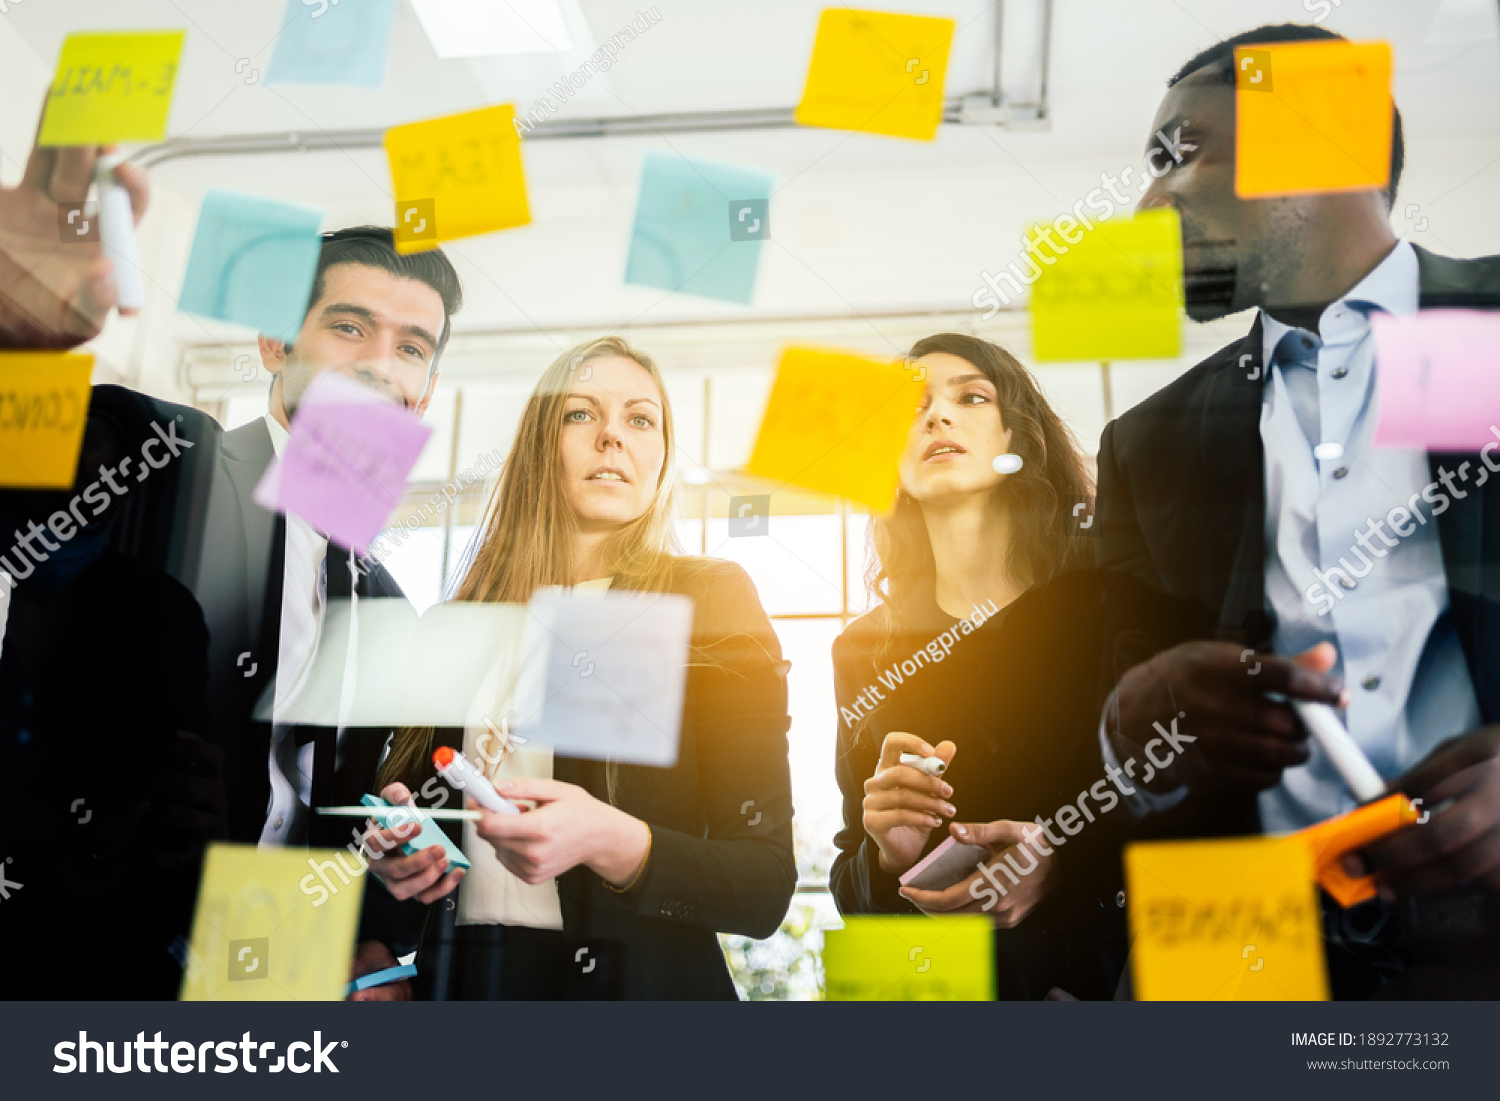 Group of successful business teamwork. Brainstorm meeting with colorful sticky paper note on glass wall for new ideas. Using agile methodology and do business. Brainstorming in a tech start-up office. #1892773132